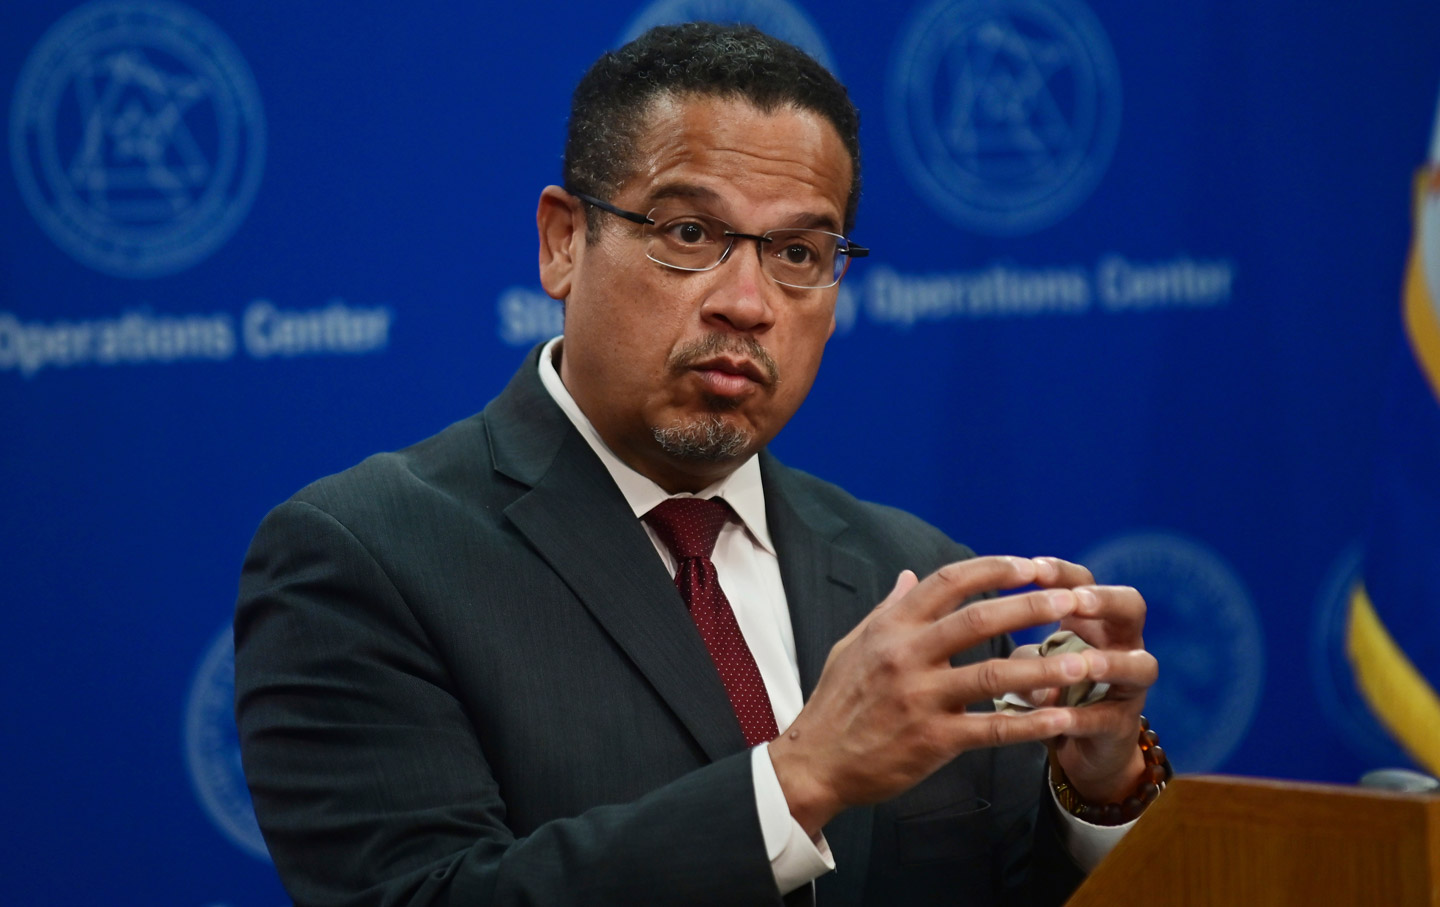 Keith Ellison on Police Brutality: ‘We Need a Vision That Says There’s Going to Be Accountability’